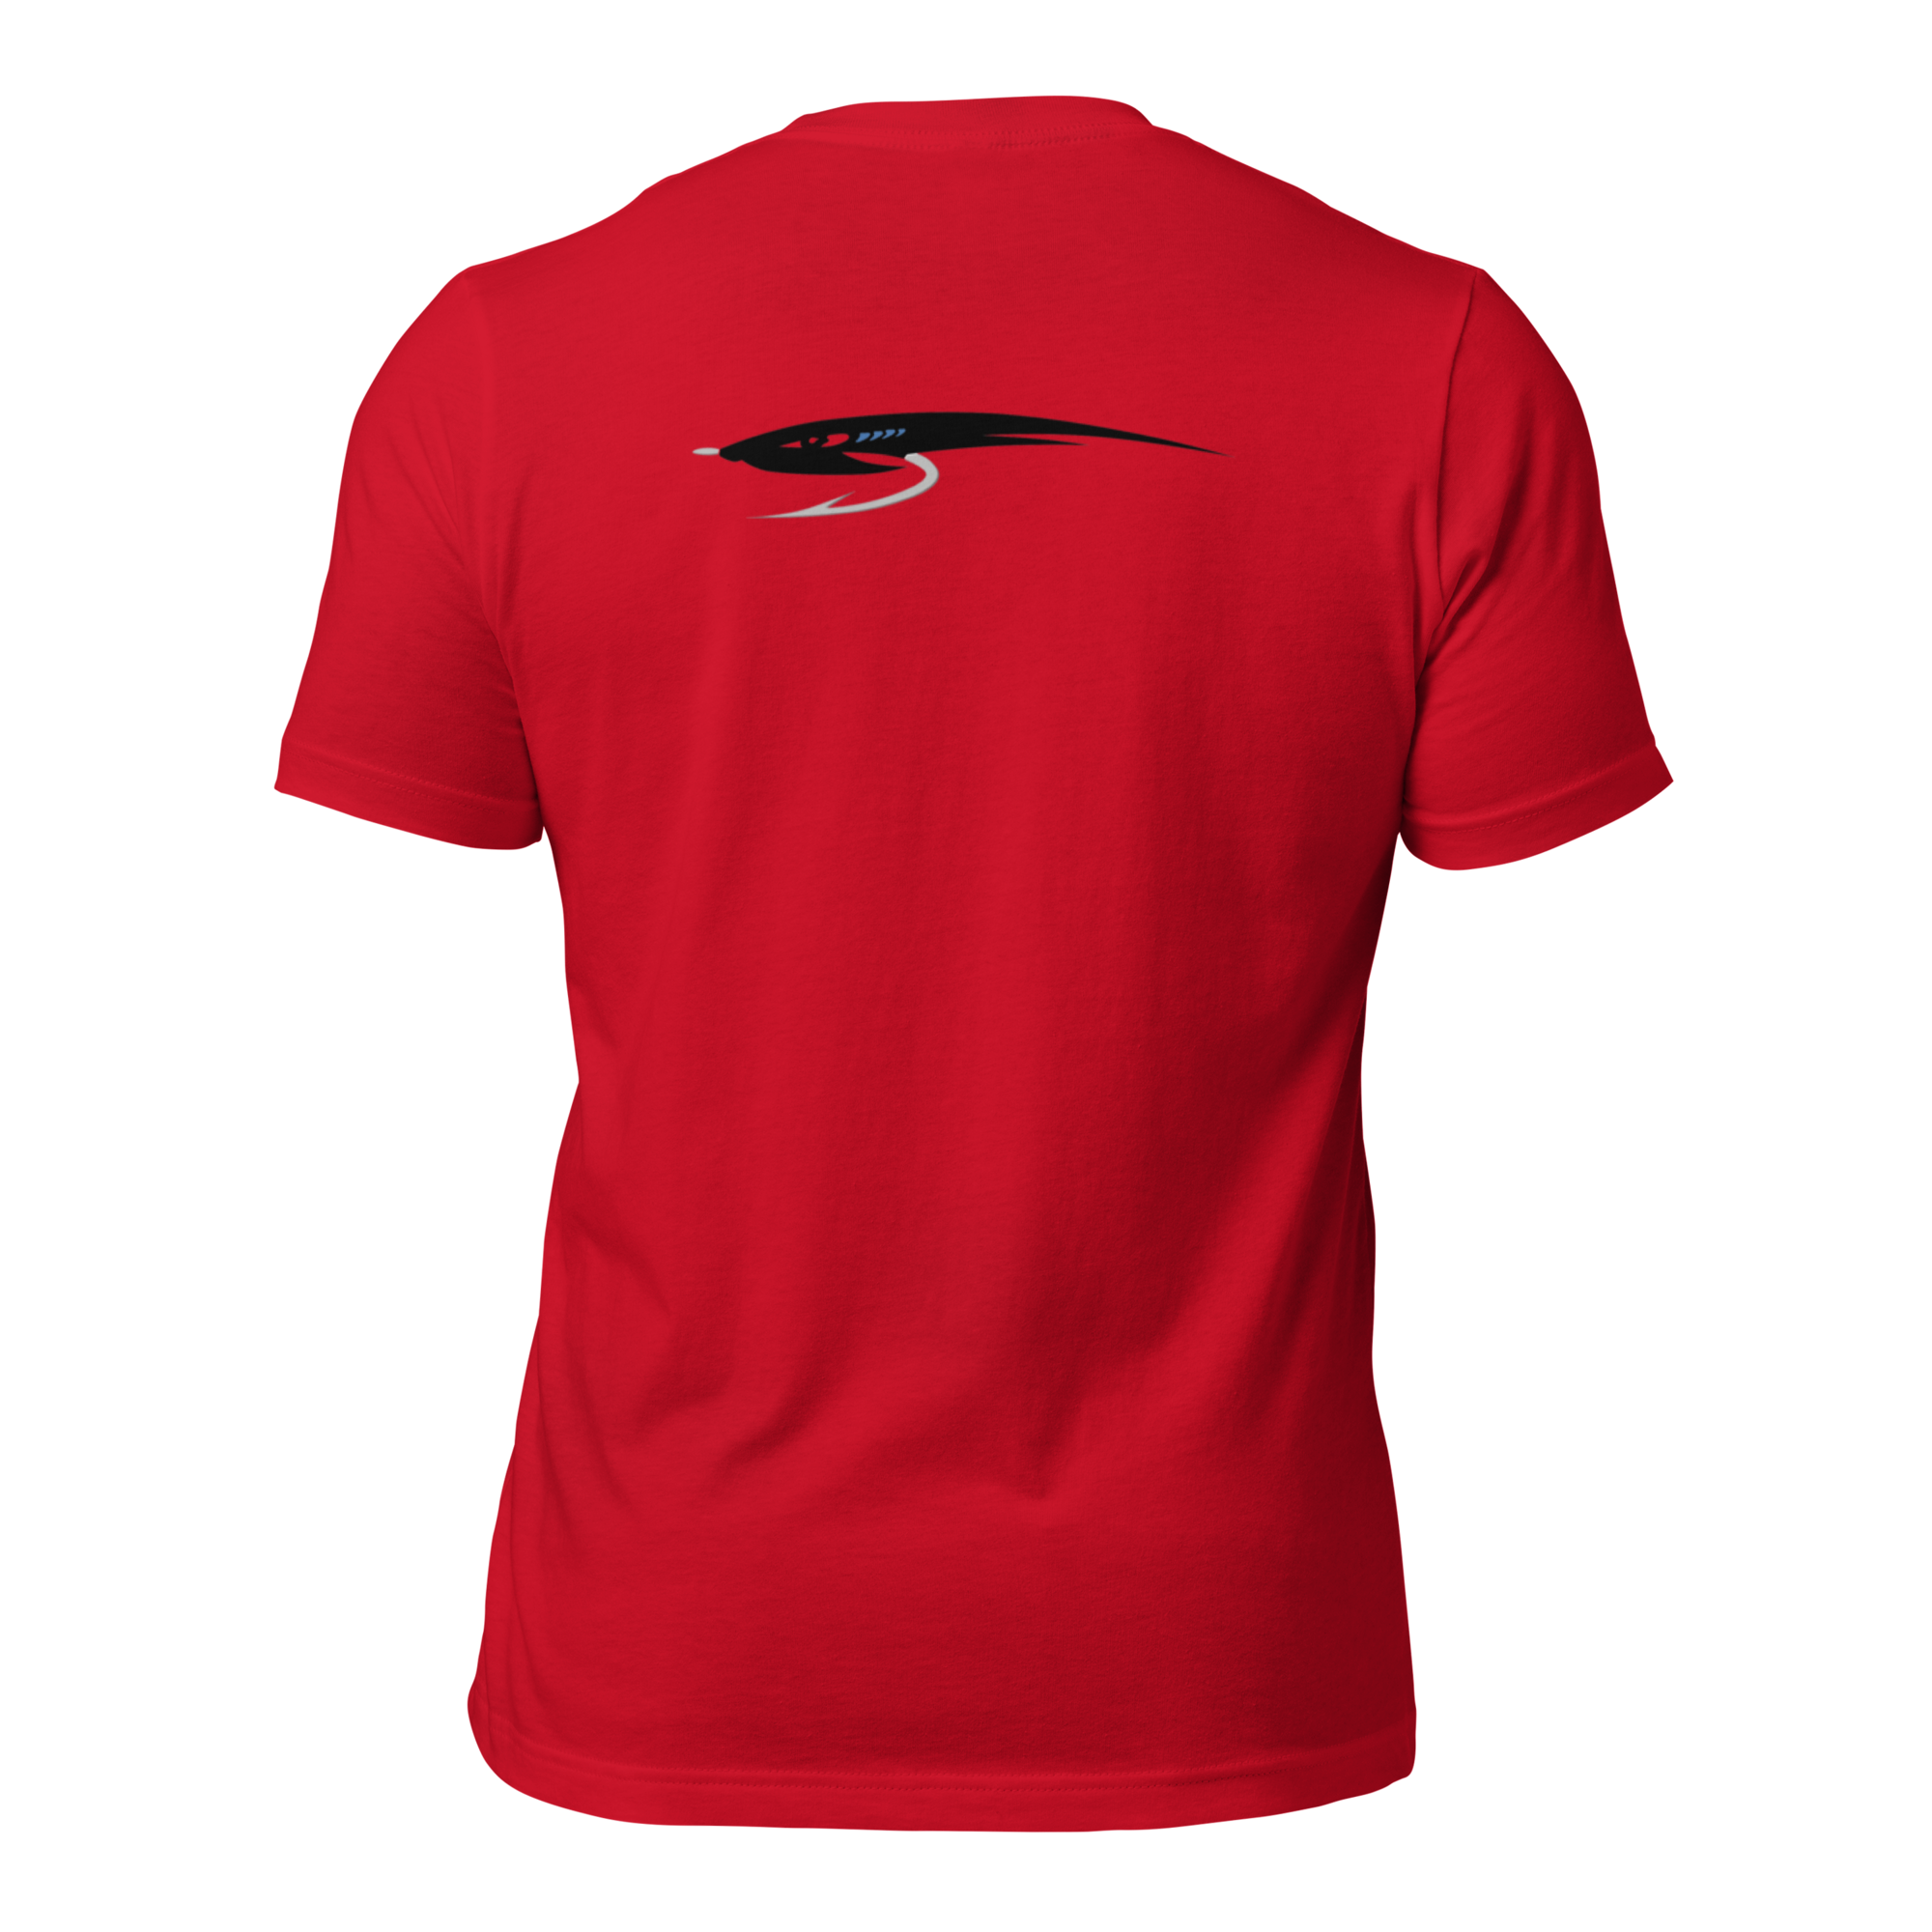 unisex-staple-t-shirt-red-back-653fc8c04f6a6.png